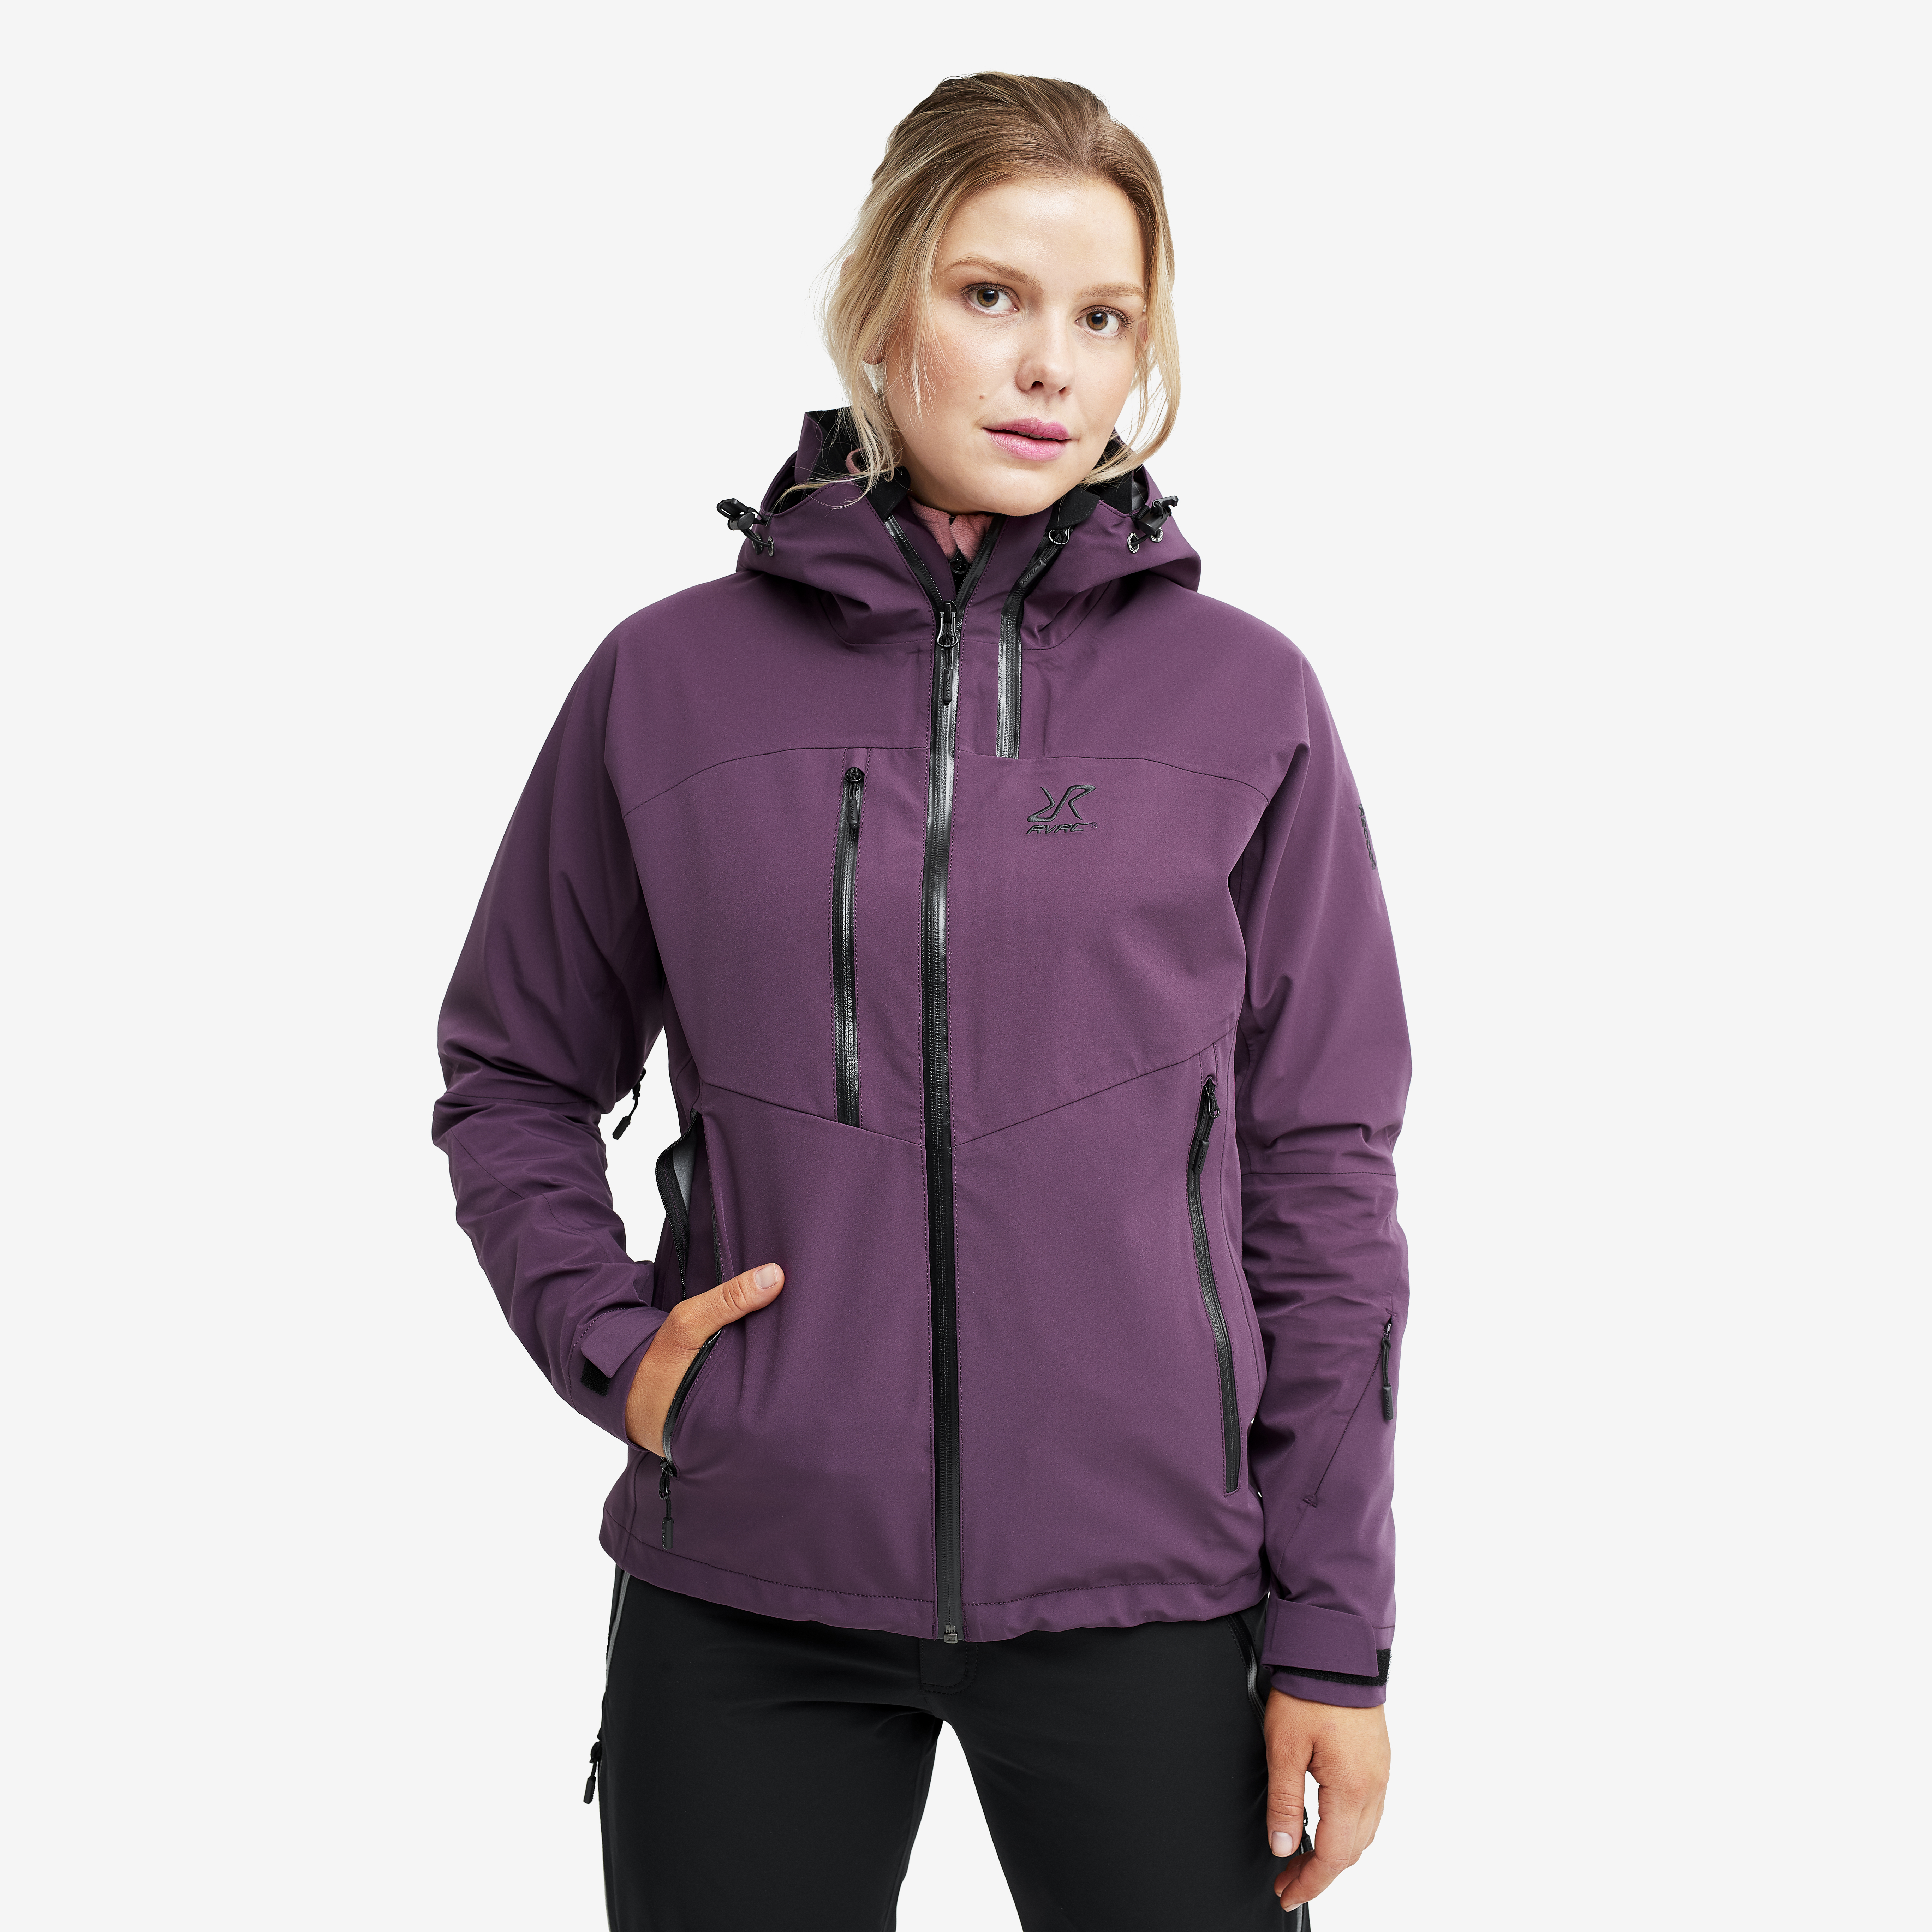 Cyclone Rescue Jacket 2.0 Blackberry Donna